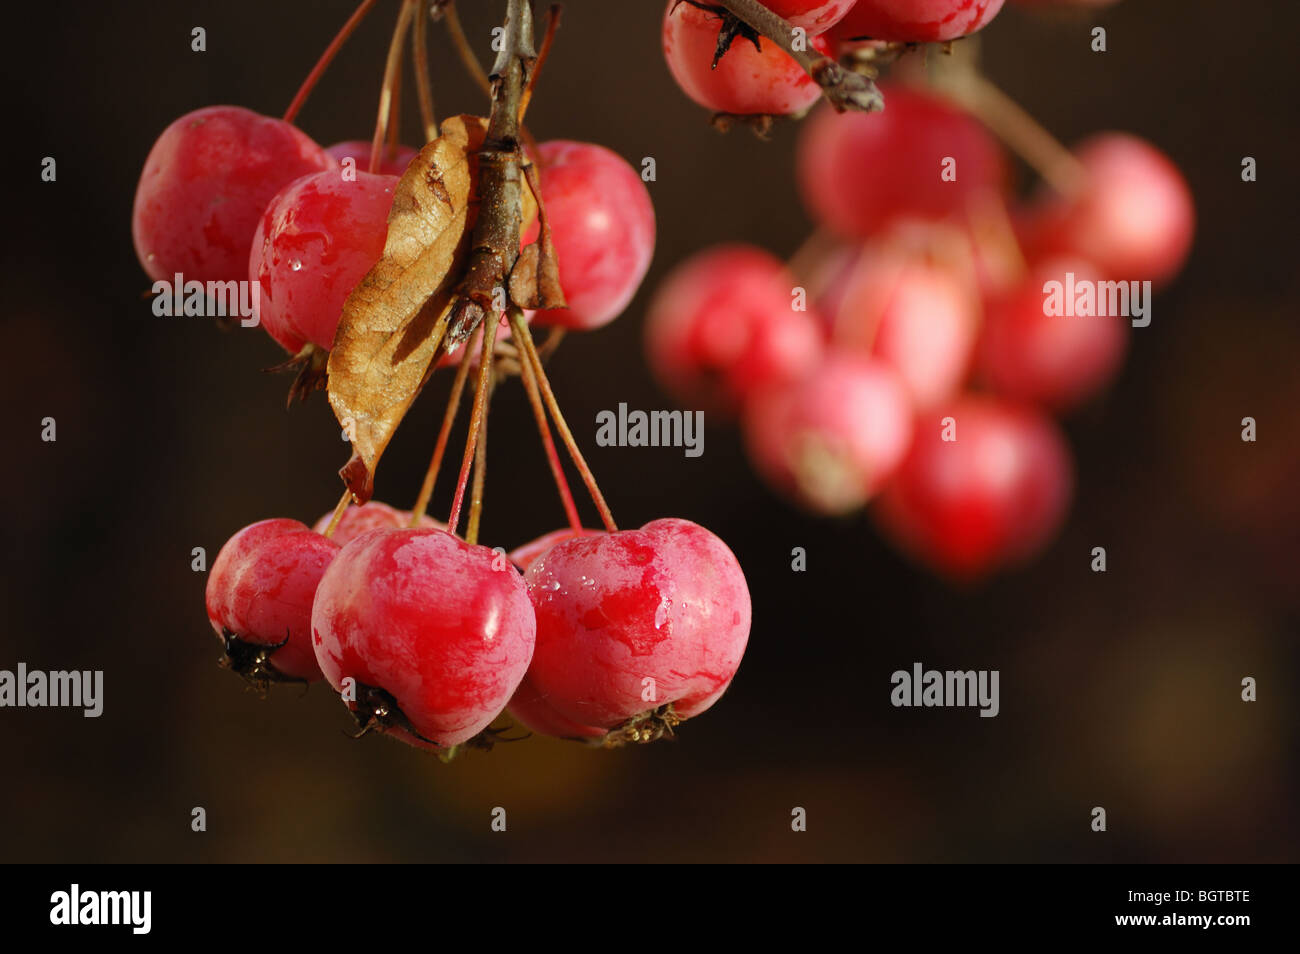 A bunch of ripe red crab apples close-up Stock Photo